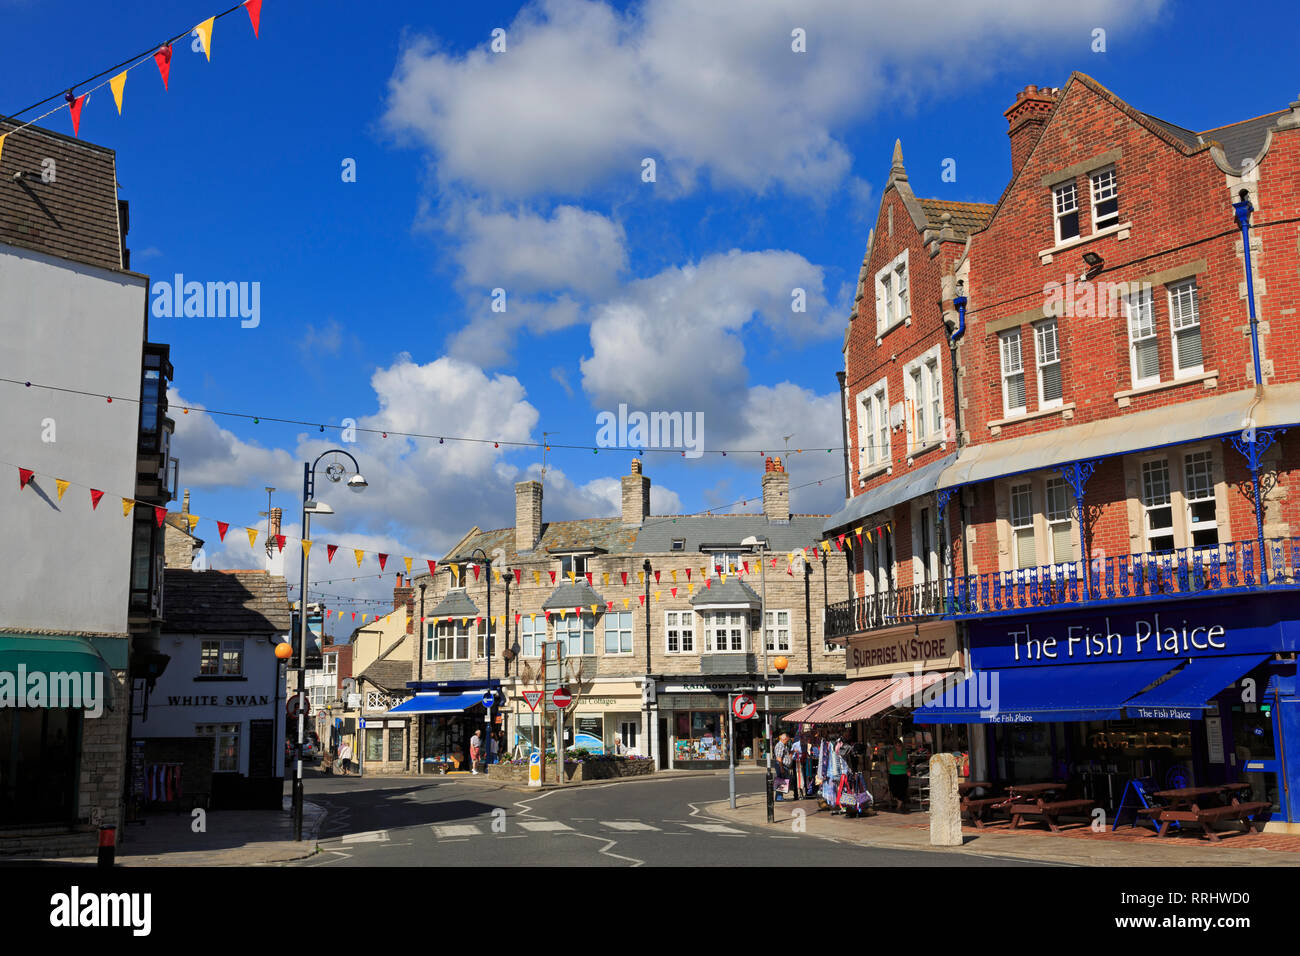 The Parade, Swanage Town, Isle of Purbeck, Dorset, England, United Kingdom, Europe Stock Photo